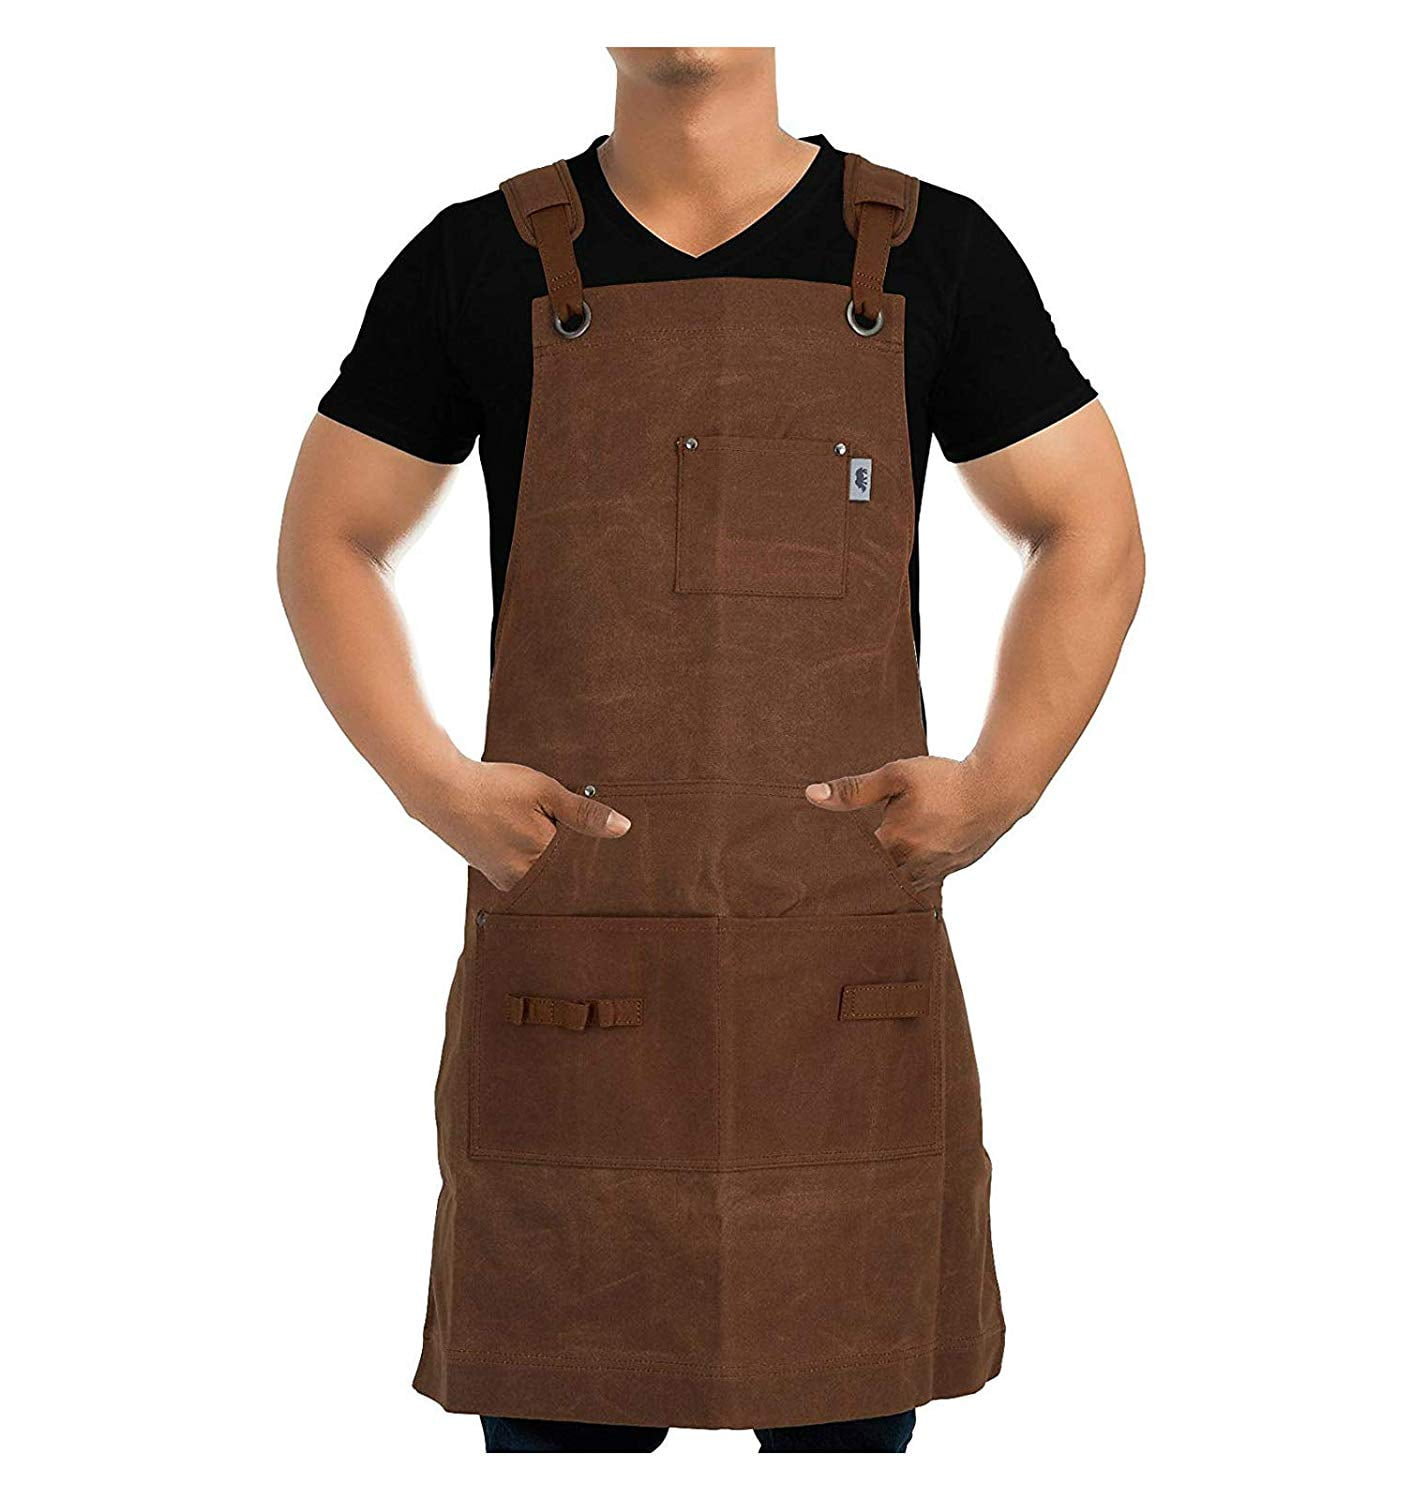 Shop Apron Waterproof Waxed Canvas Work Apron with Pockets Fully Adjustable to Comfortably Fit Men and Women Size S to XXL Tough Tool Apron to Give Protection and Last a Lifetime